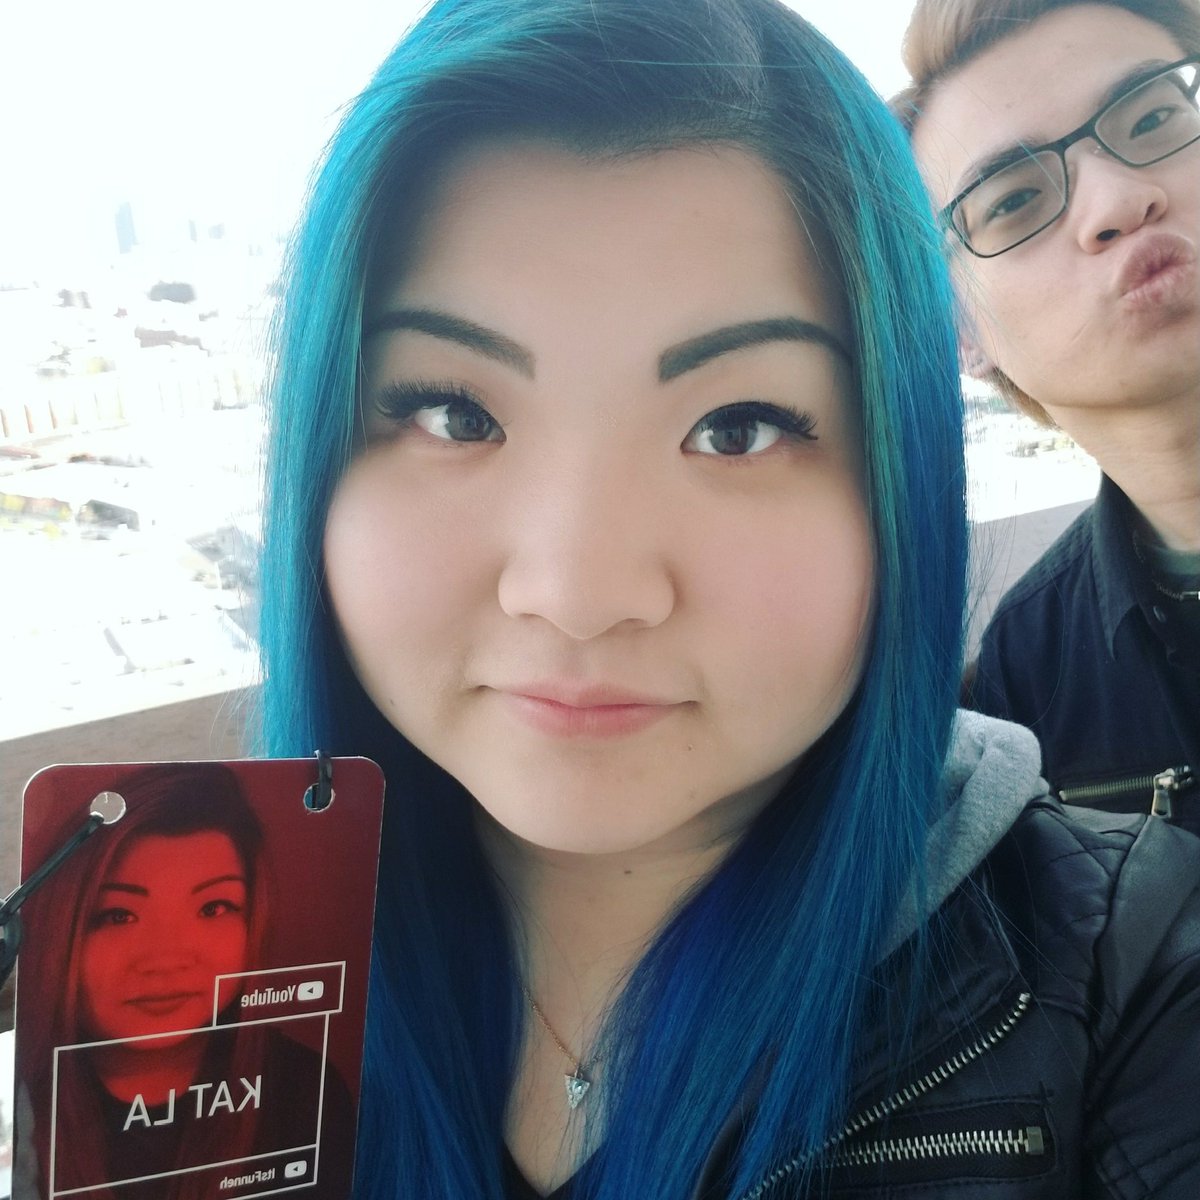 Itsfunneh On Twitter Arrived At Youtube Creator Summit